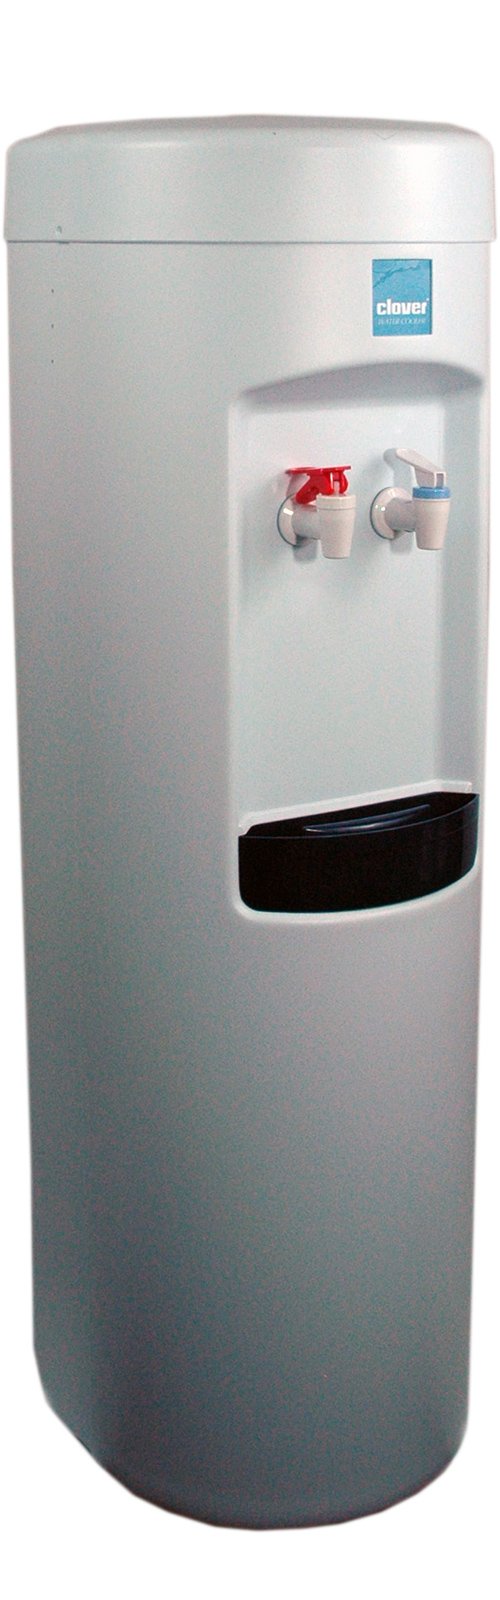 Clover D7A Hot and Cold Bottleless Water Dispenser with Install Kit White